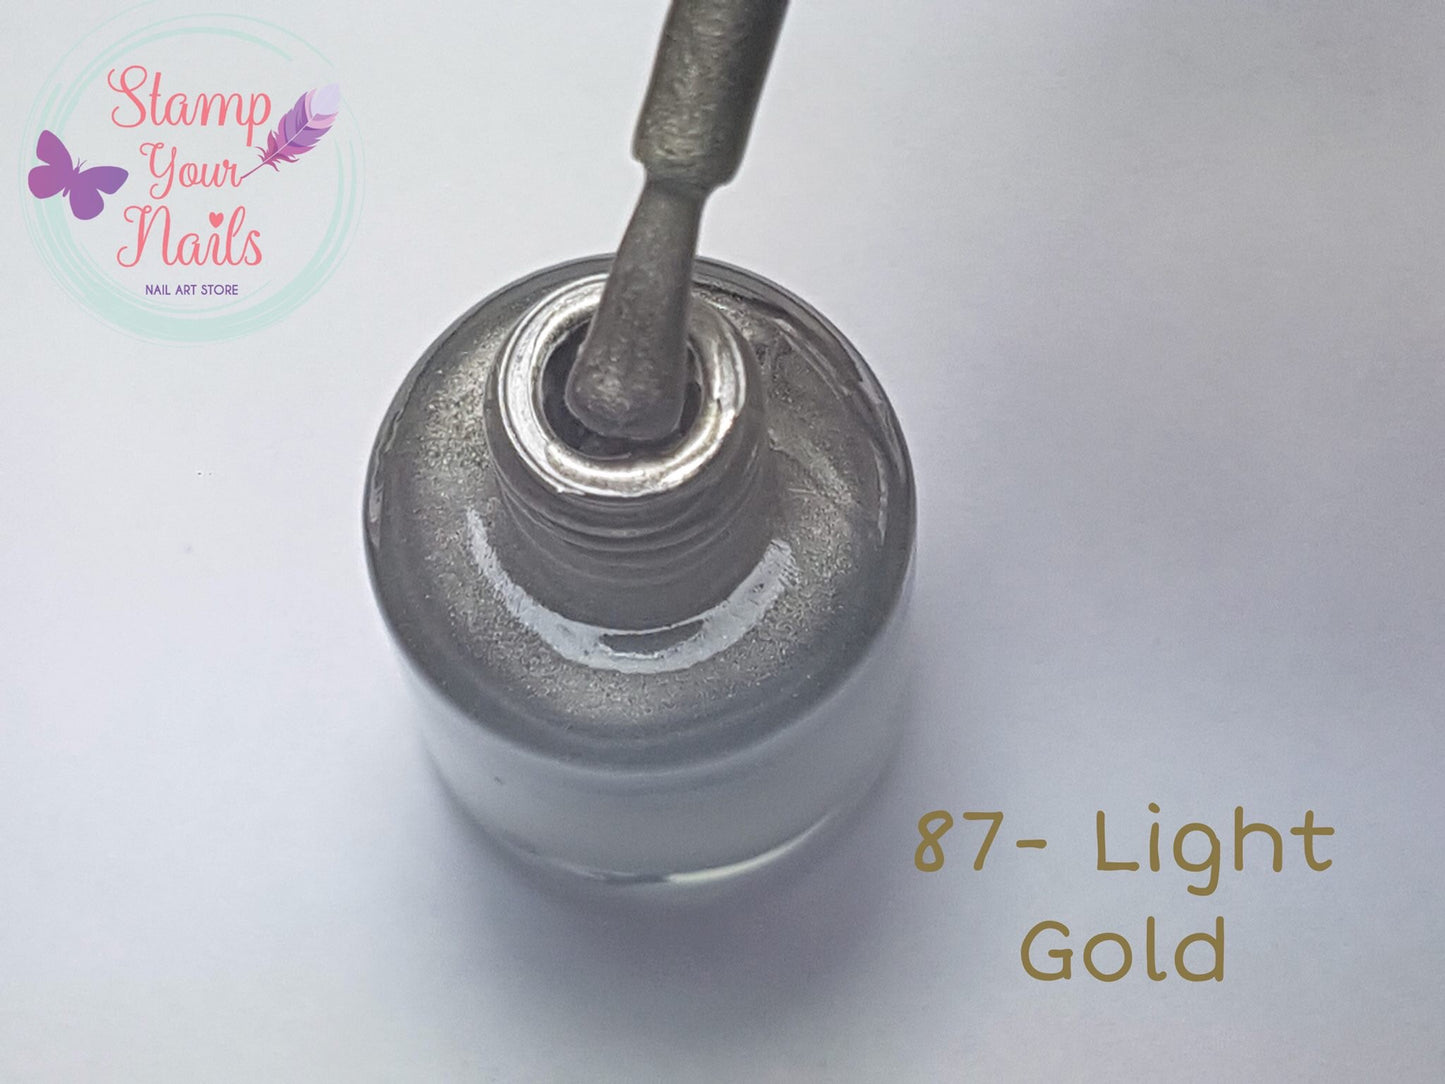 87 Light Gold - Stamp your nails